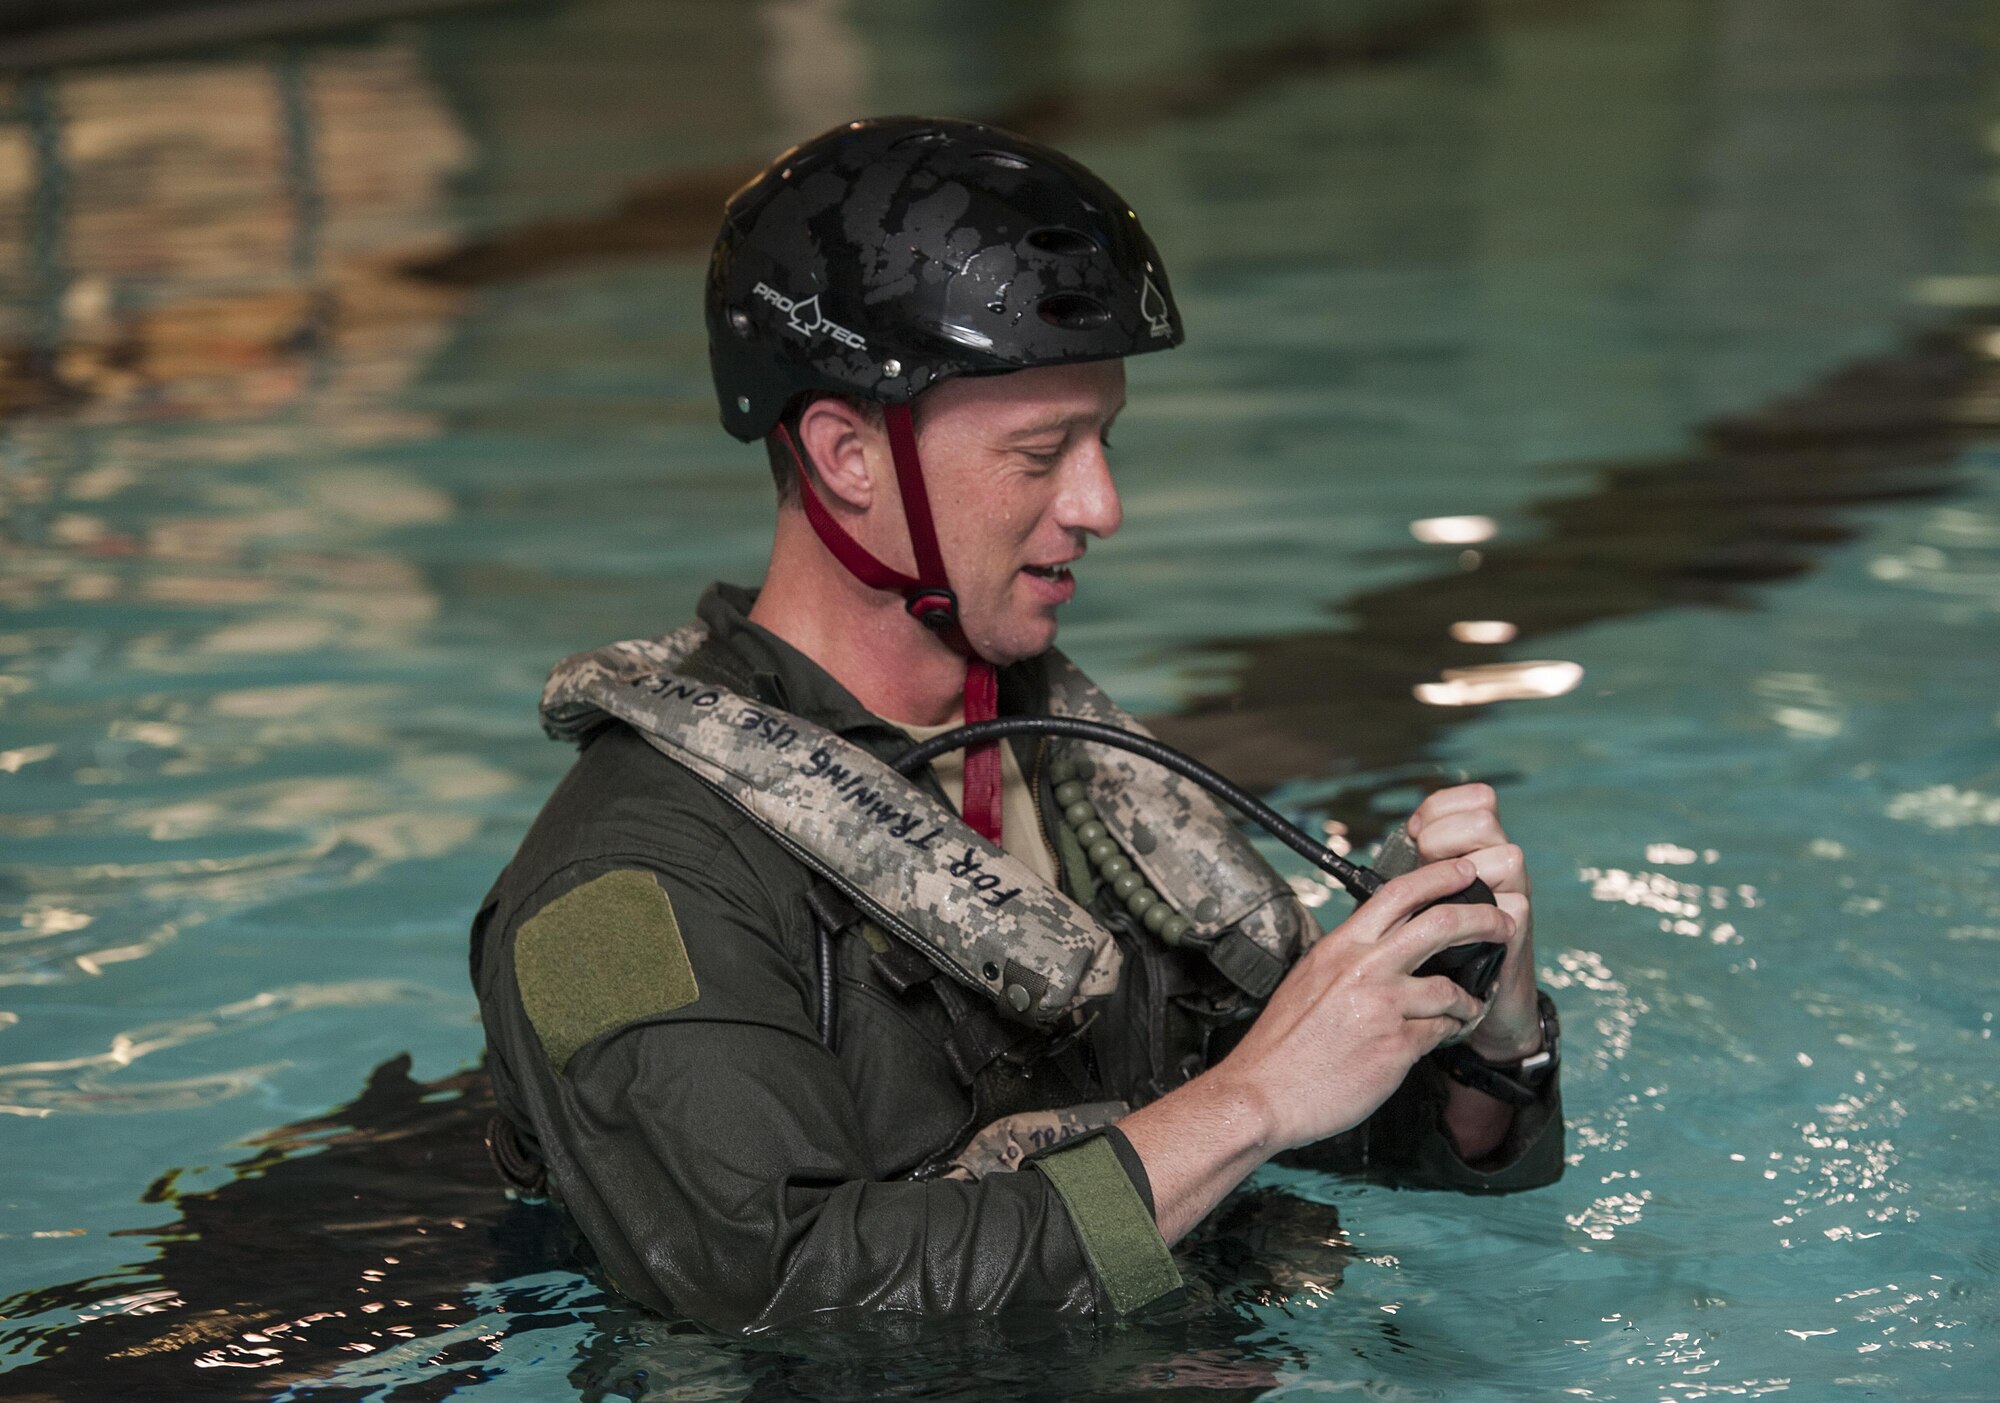 Master Sgt. David Grabher, 54th Helicopter Squadron flight engineer, tests safety equipment at Minot Air Force Base, N.D., June 22, 2017. Underwater egress survival training prepares Airmen to escape during a potential crash into water. (U.S. Air Force photo by Airman 1st Class Jonathan McElderry)